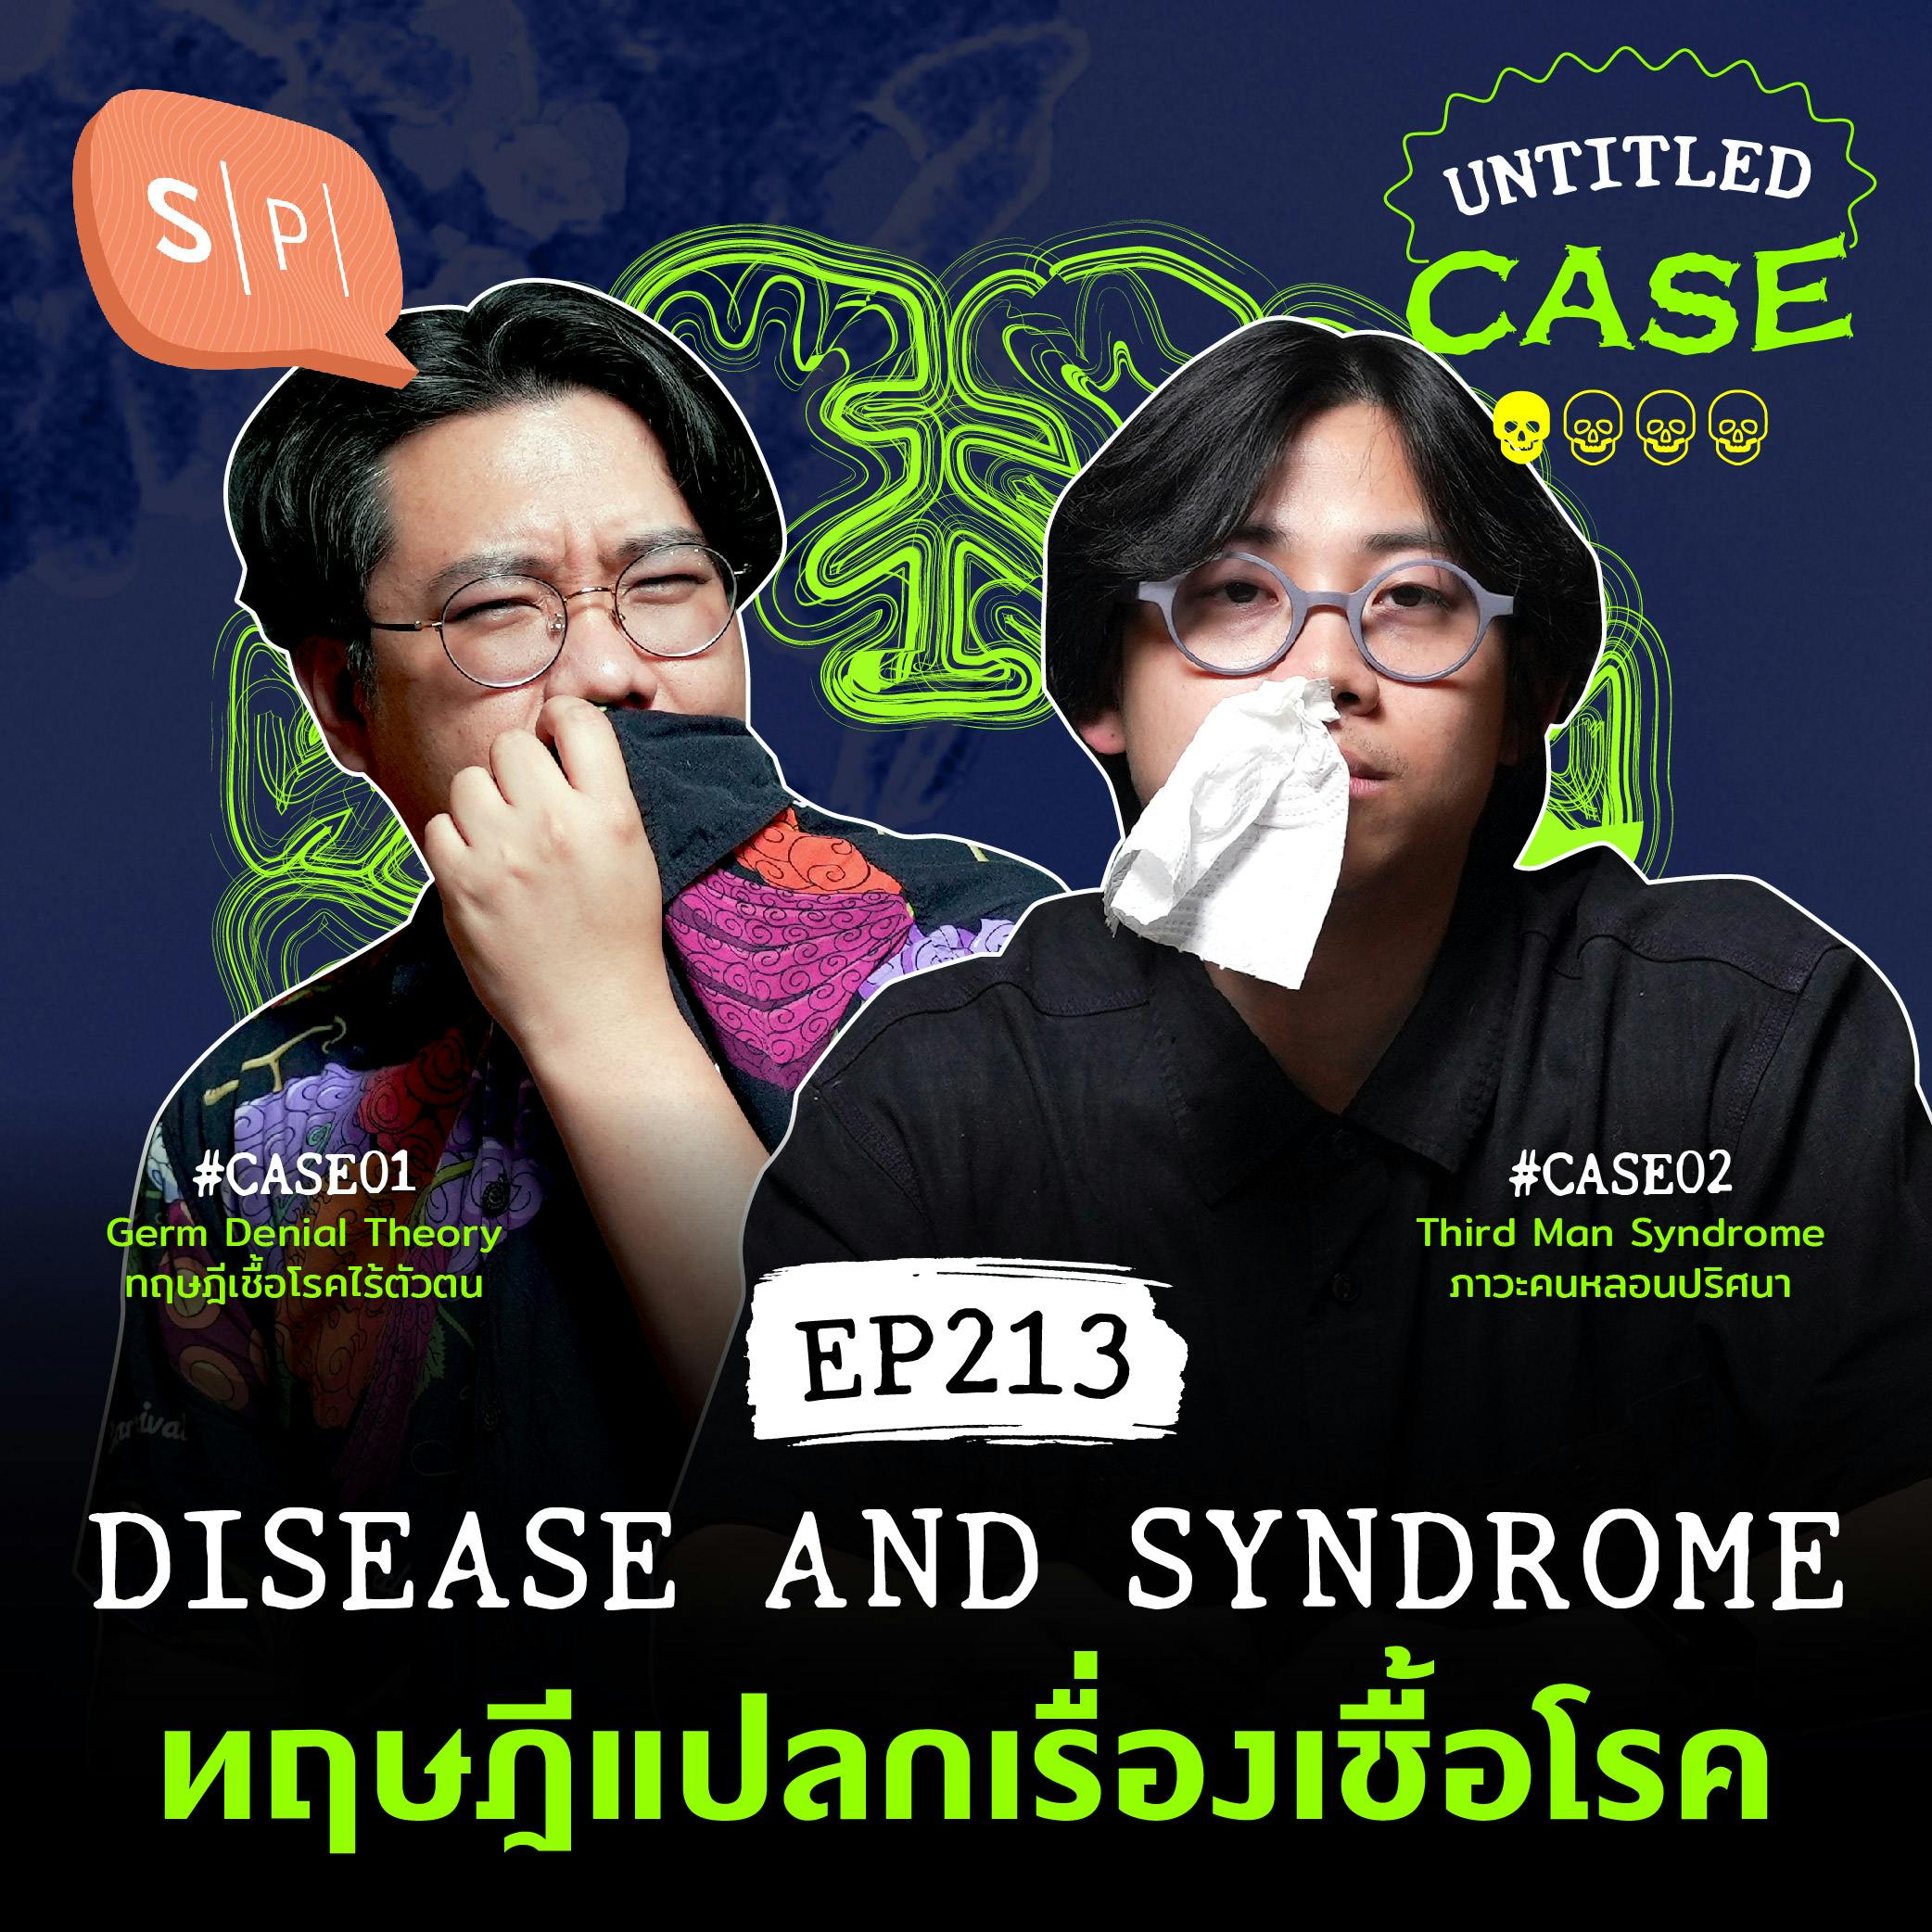 Disease and Syndrome ทฤษฎีแปลกเรื่องเชื้อโรค | Untitled Case EP213